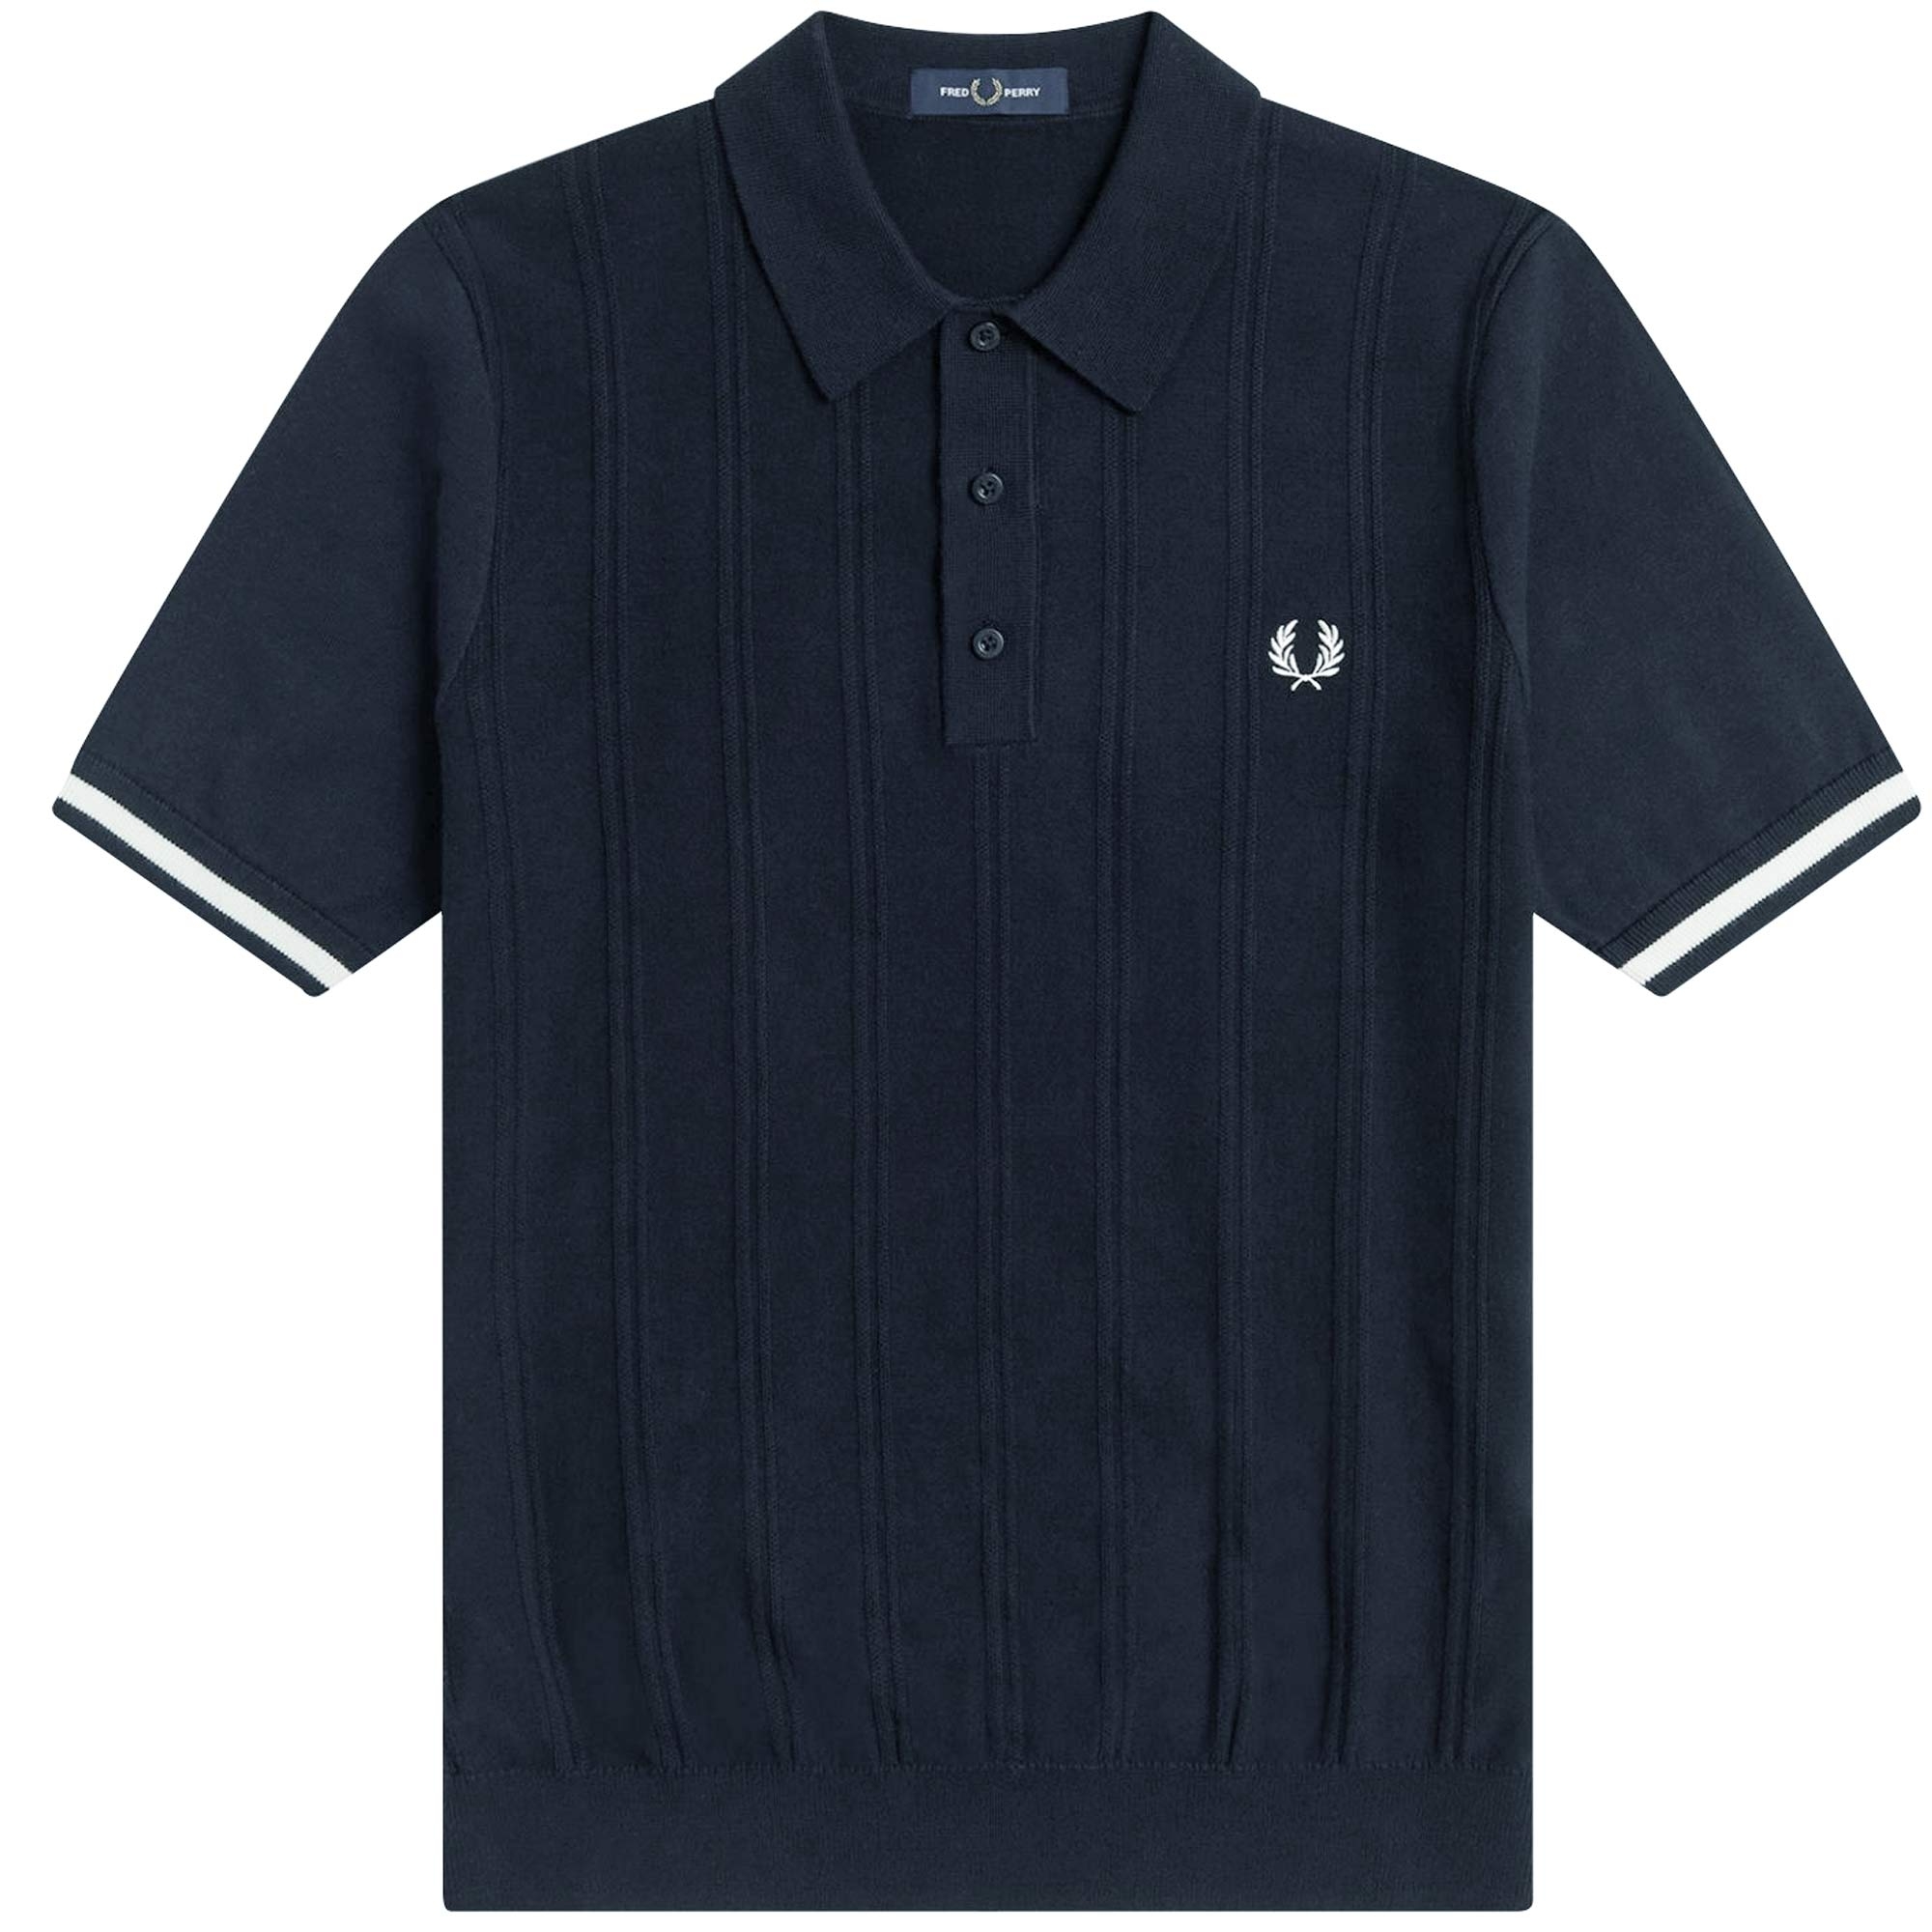 Fred Perry Tipping Texture Shirt in Shaded Navy